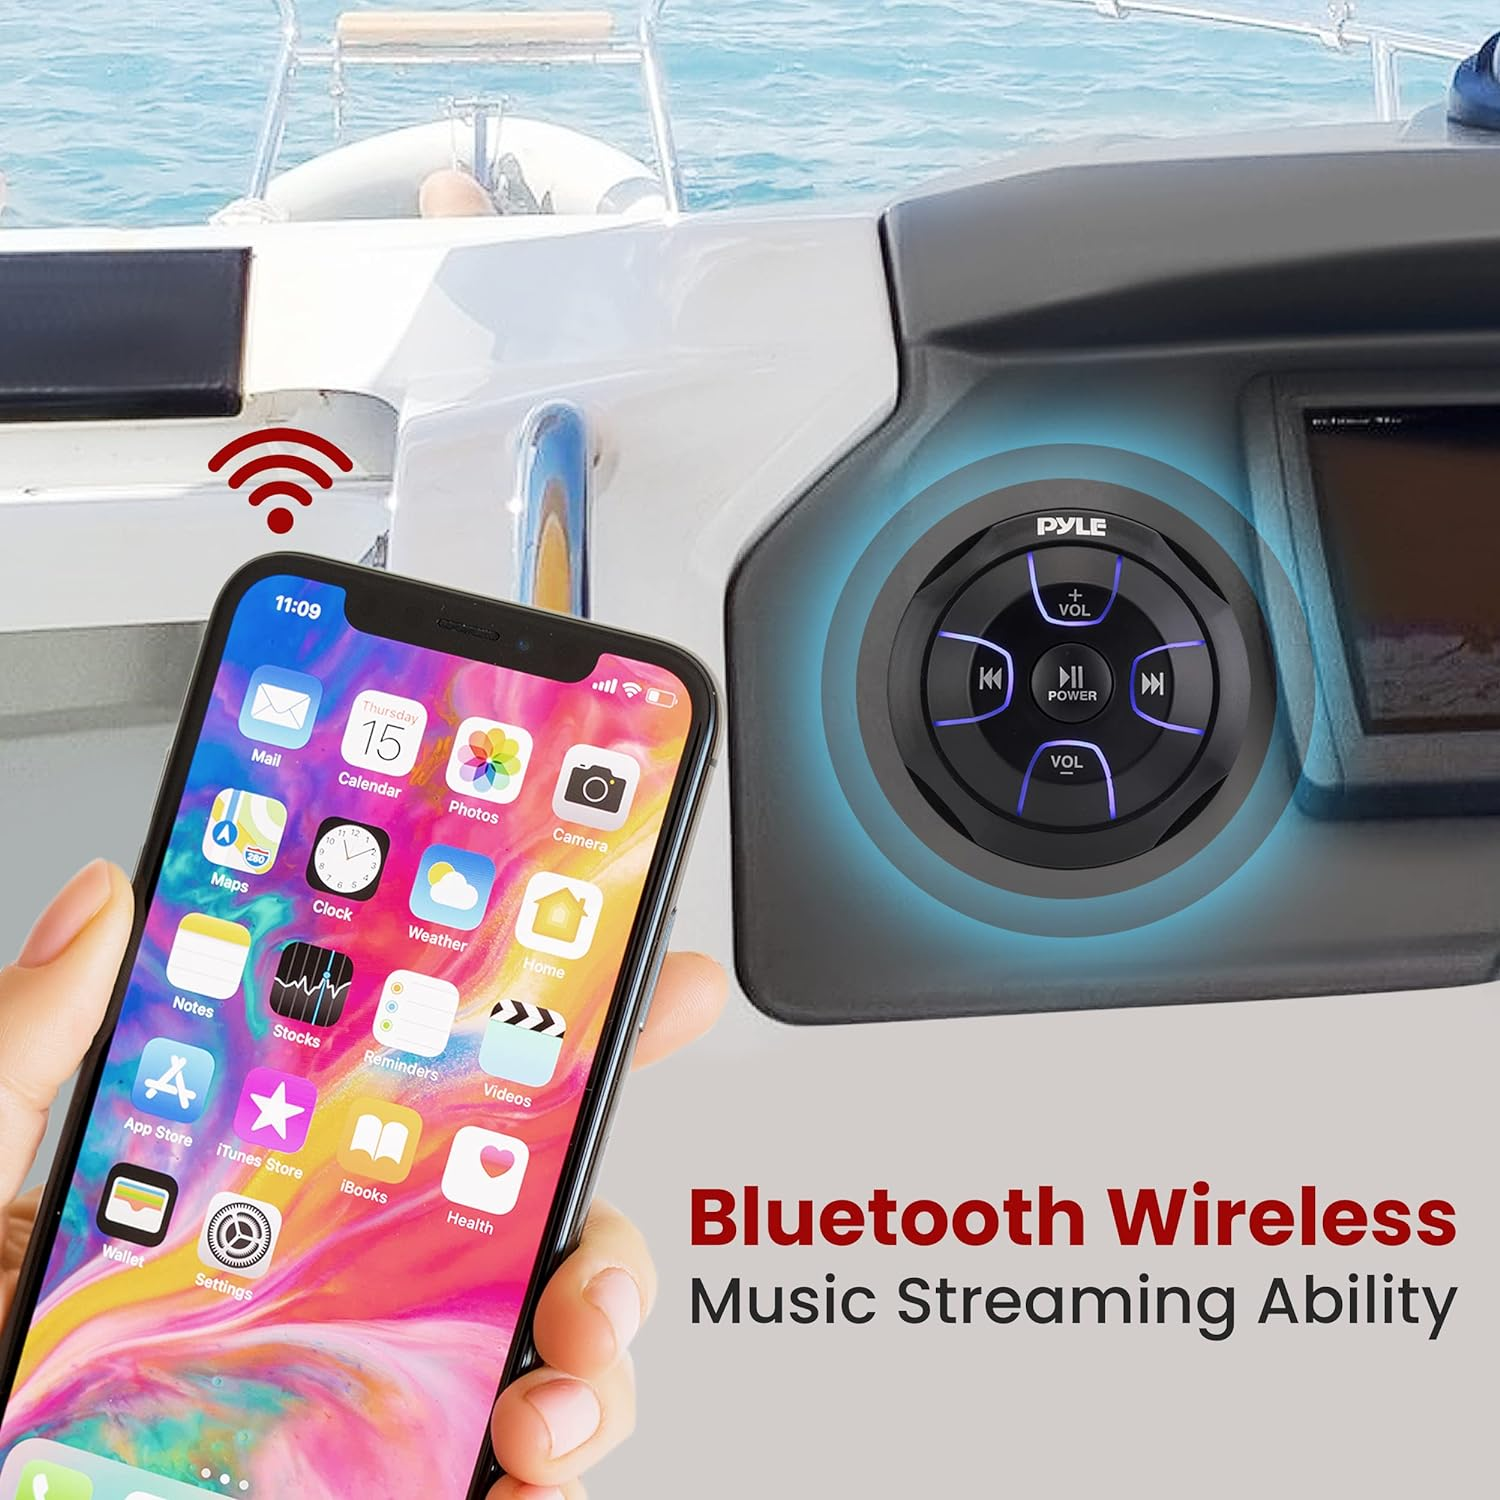 Waterproof Bluetooth Marine Amplifier Receiver - Weatherproof 2 Channel Wireless Amp for Stereo Speaker with 600 Watt Power, Wired RCA, AUX and MP3 Audio Input Cable - Pyle PLMRMBT5S (Silver)